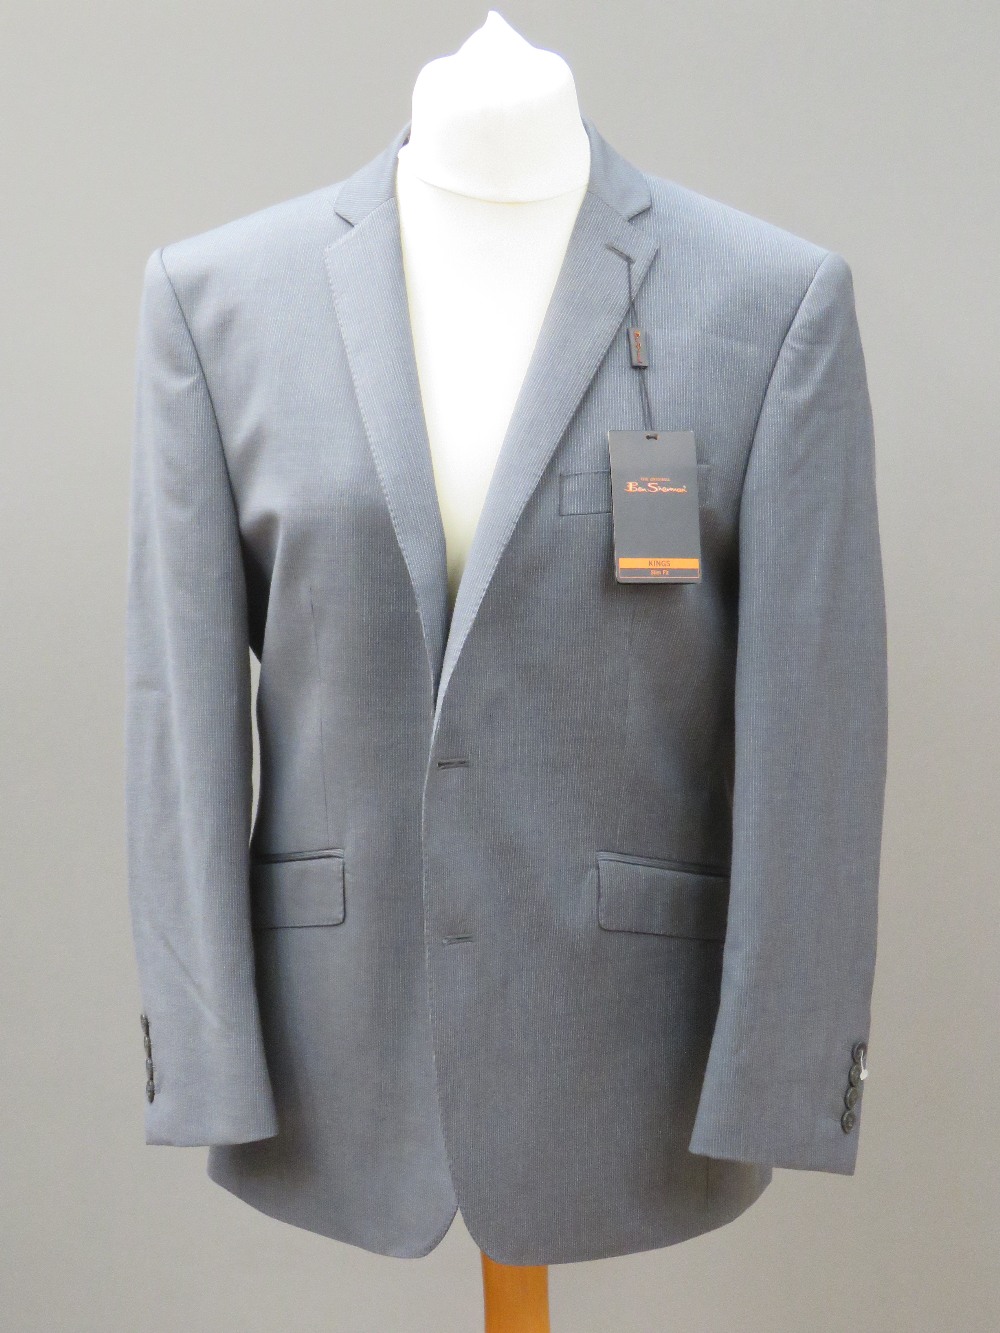 Ben Sherman men's suit jacket, 42" Short. New with tags.